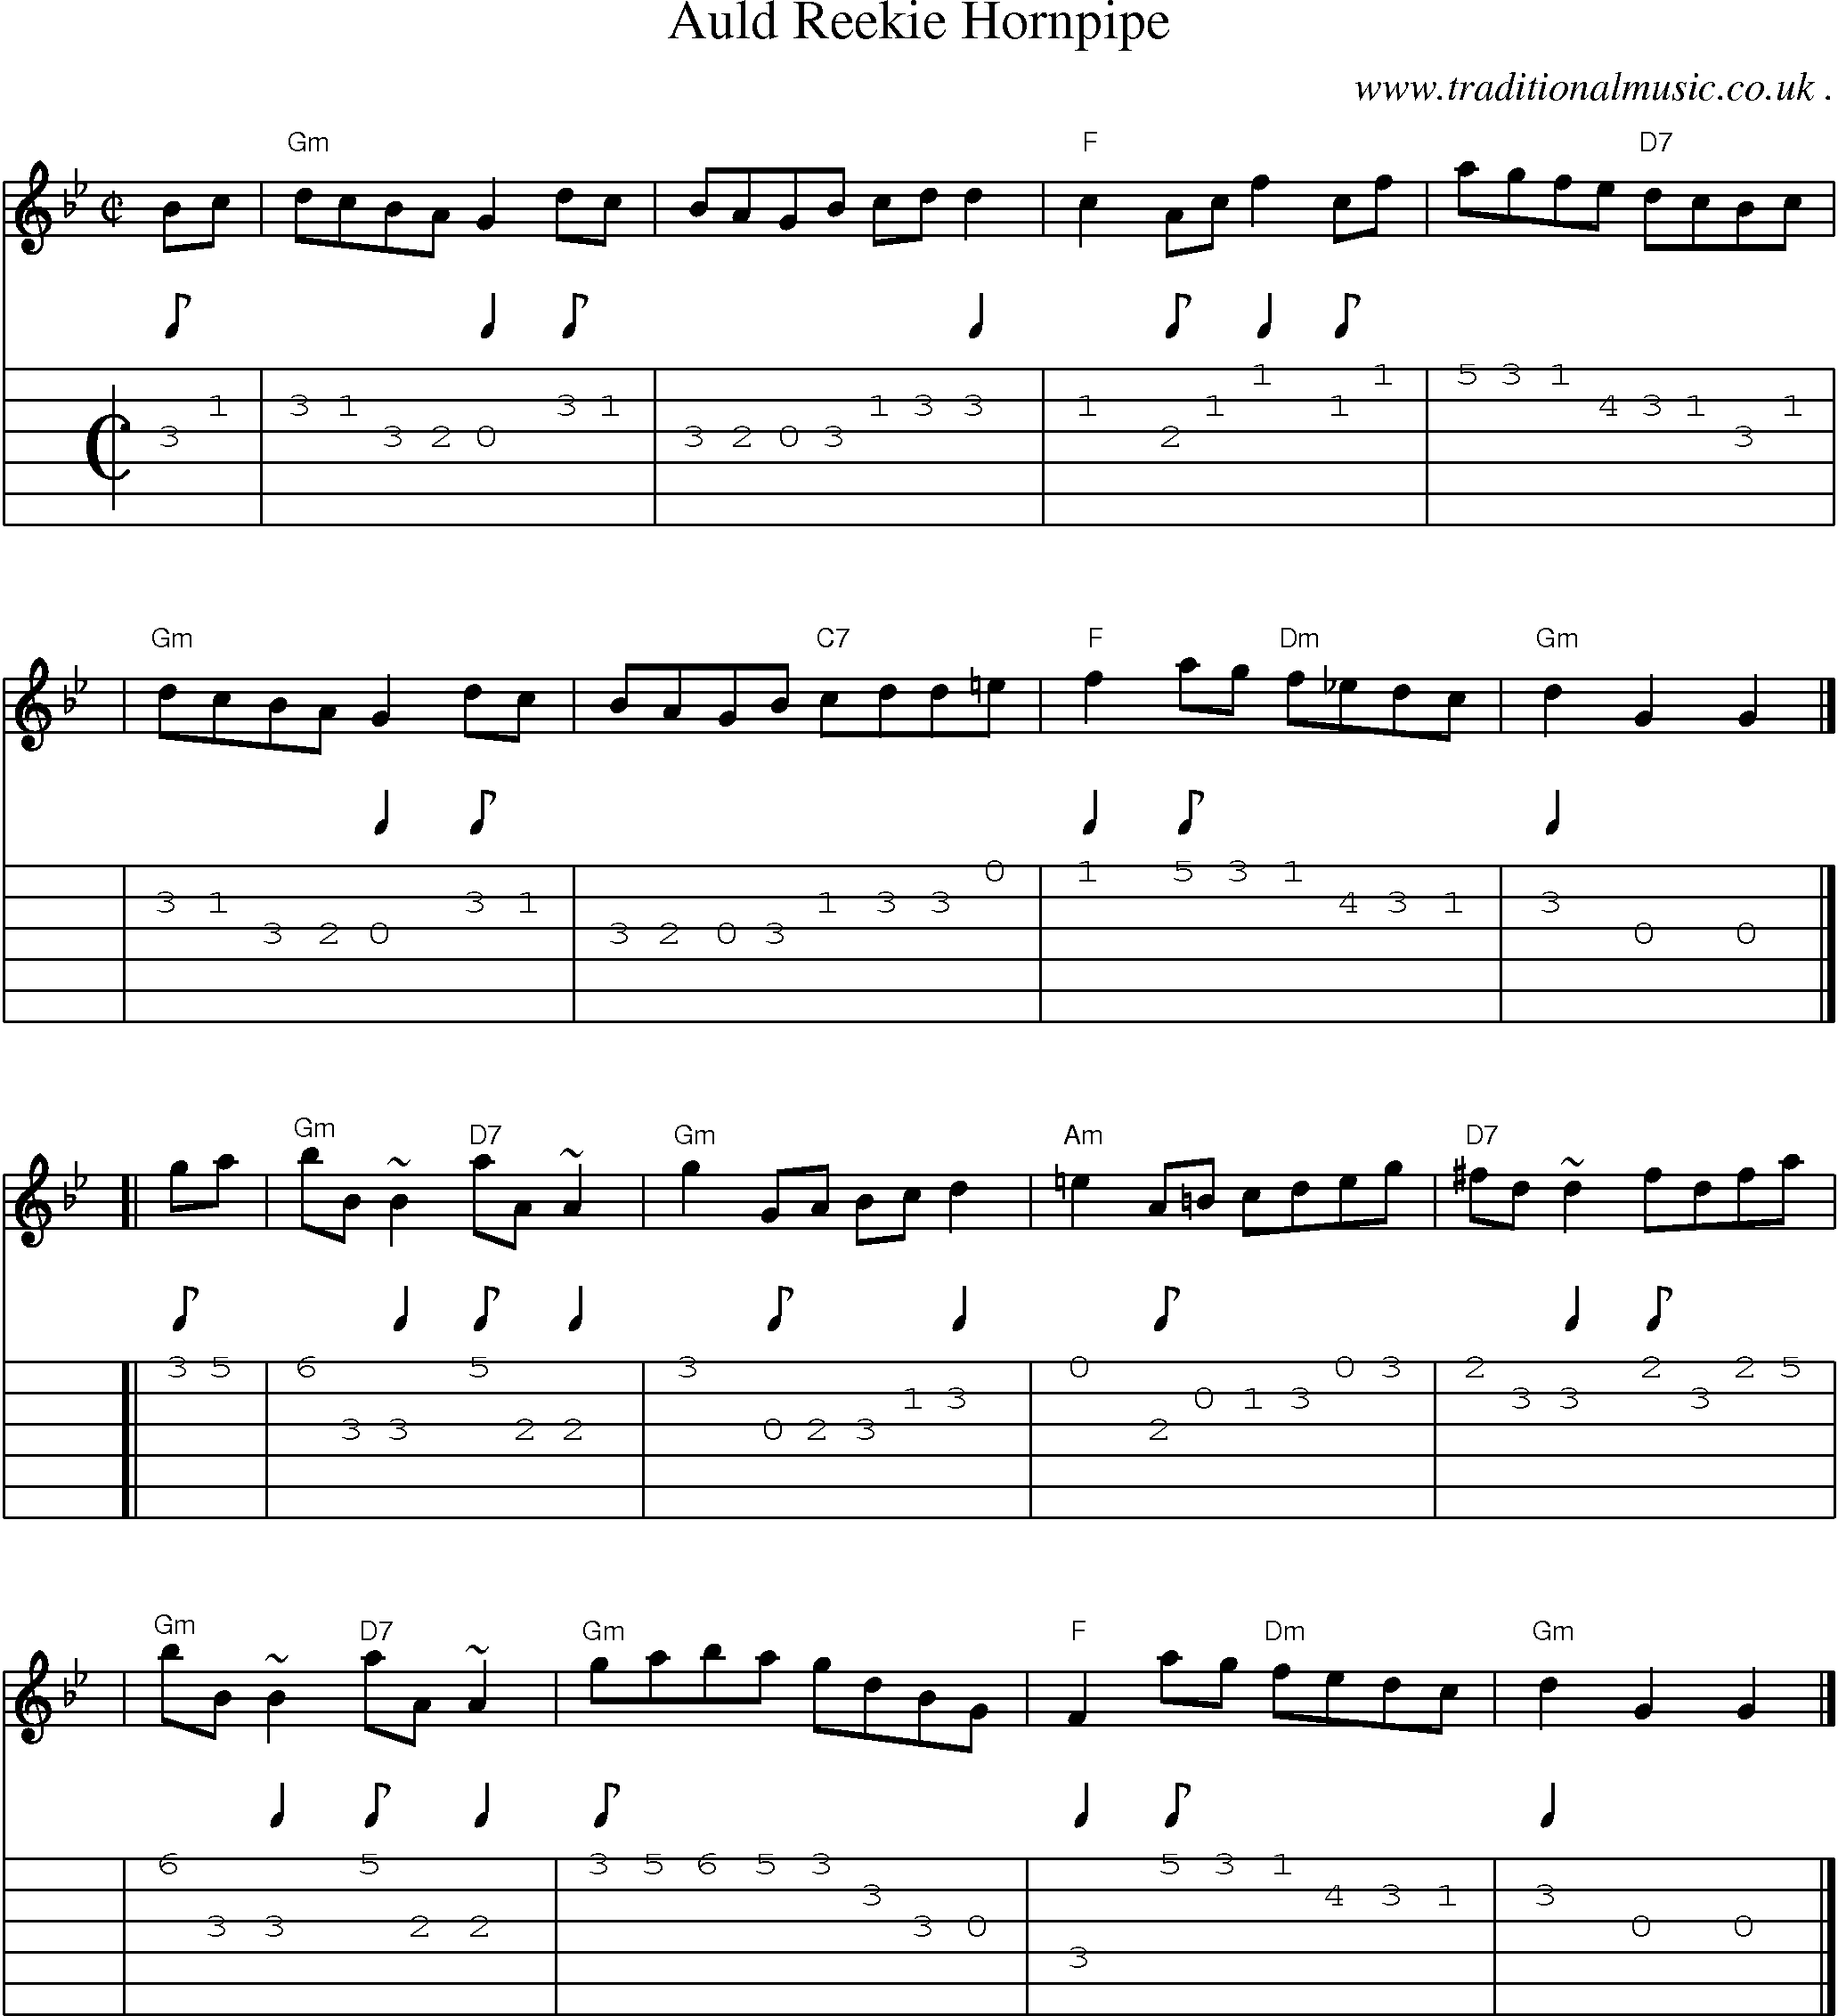 Sheet-music  score, Chords and Guitar Tabs for Auld Reekie Hornpipe